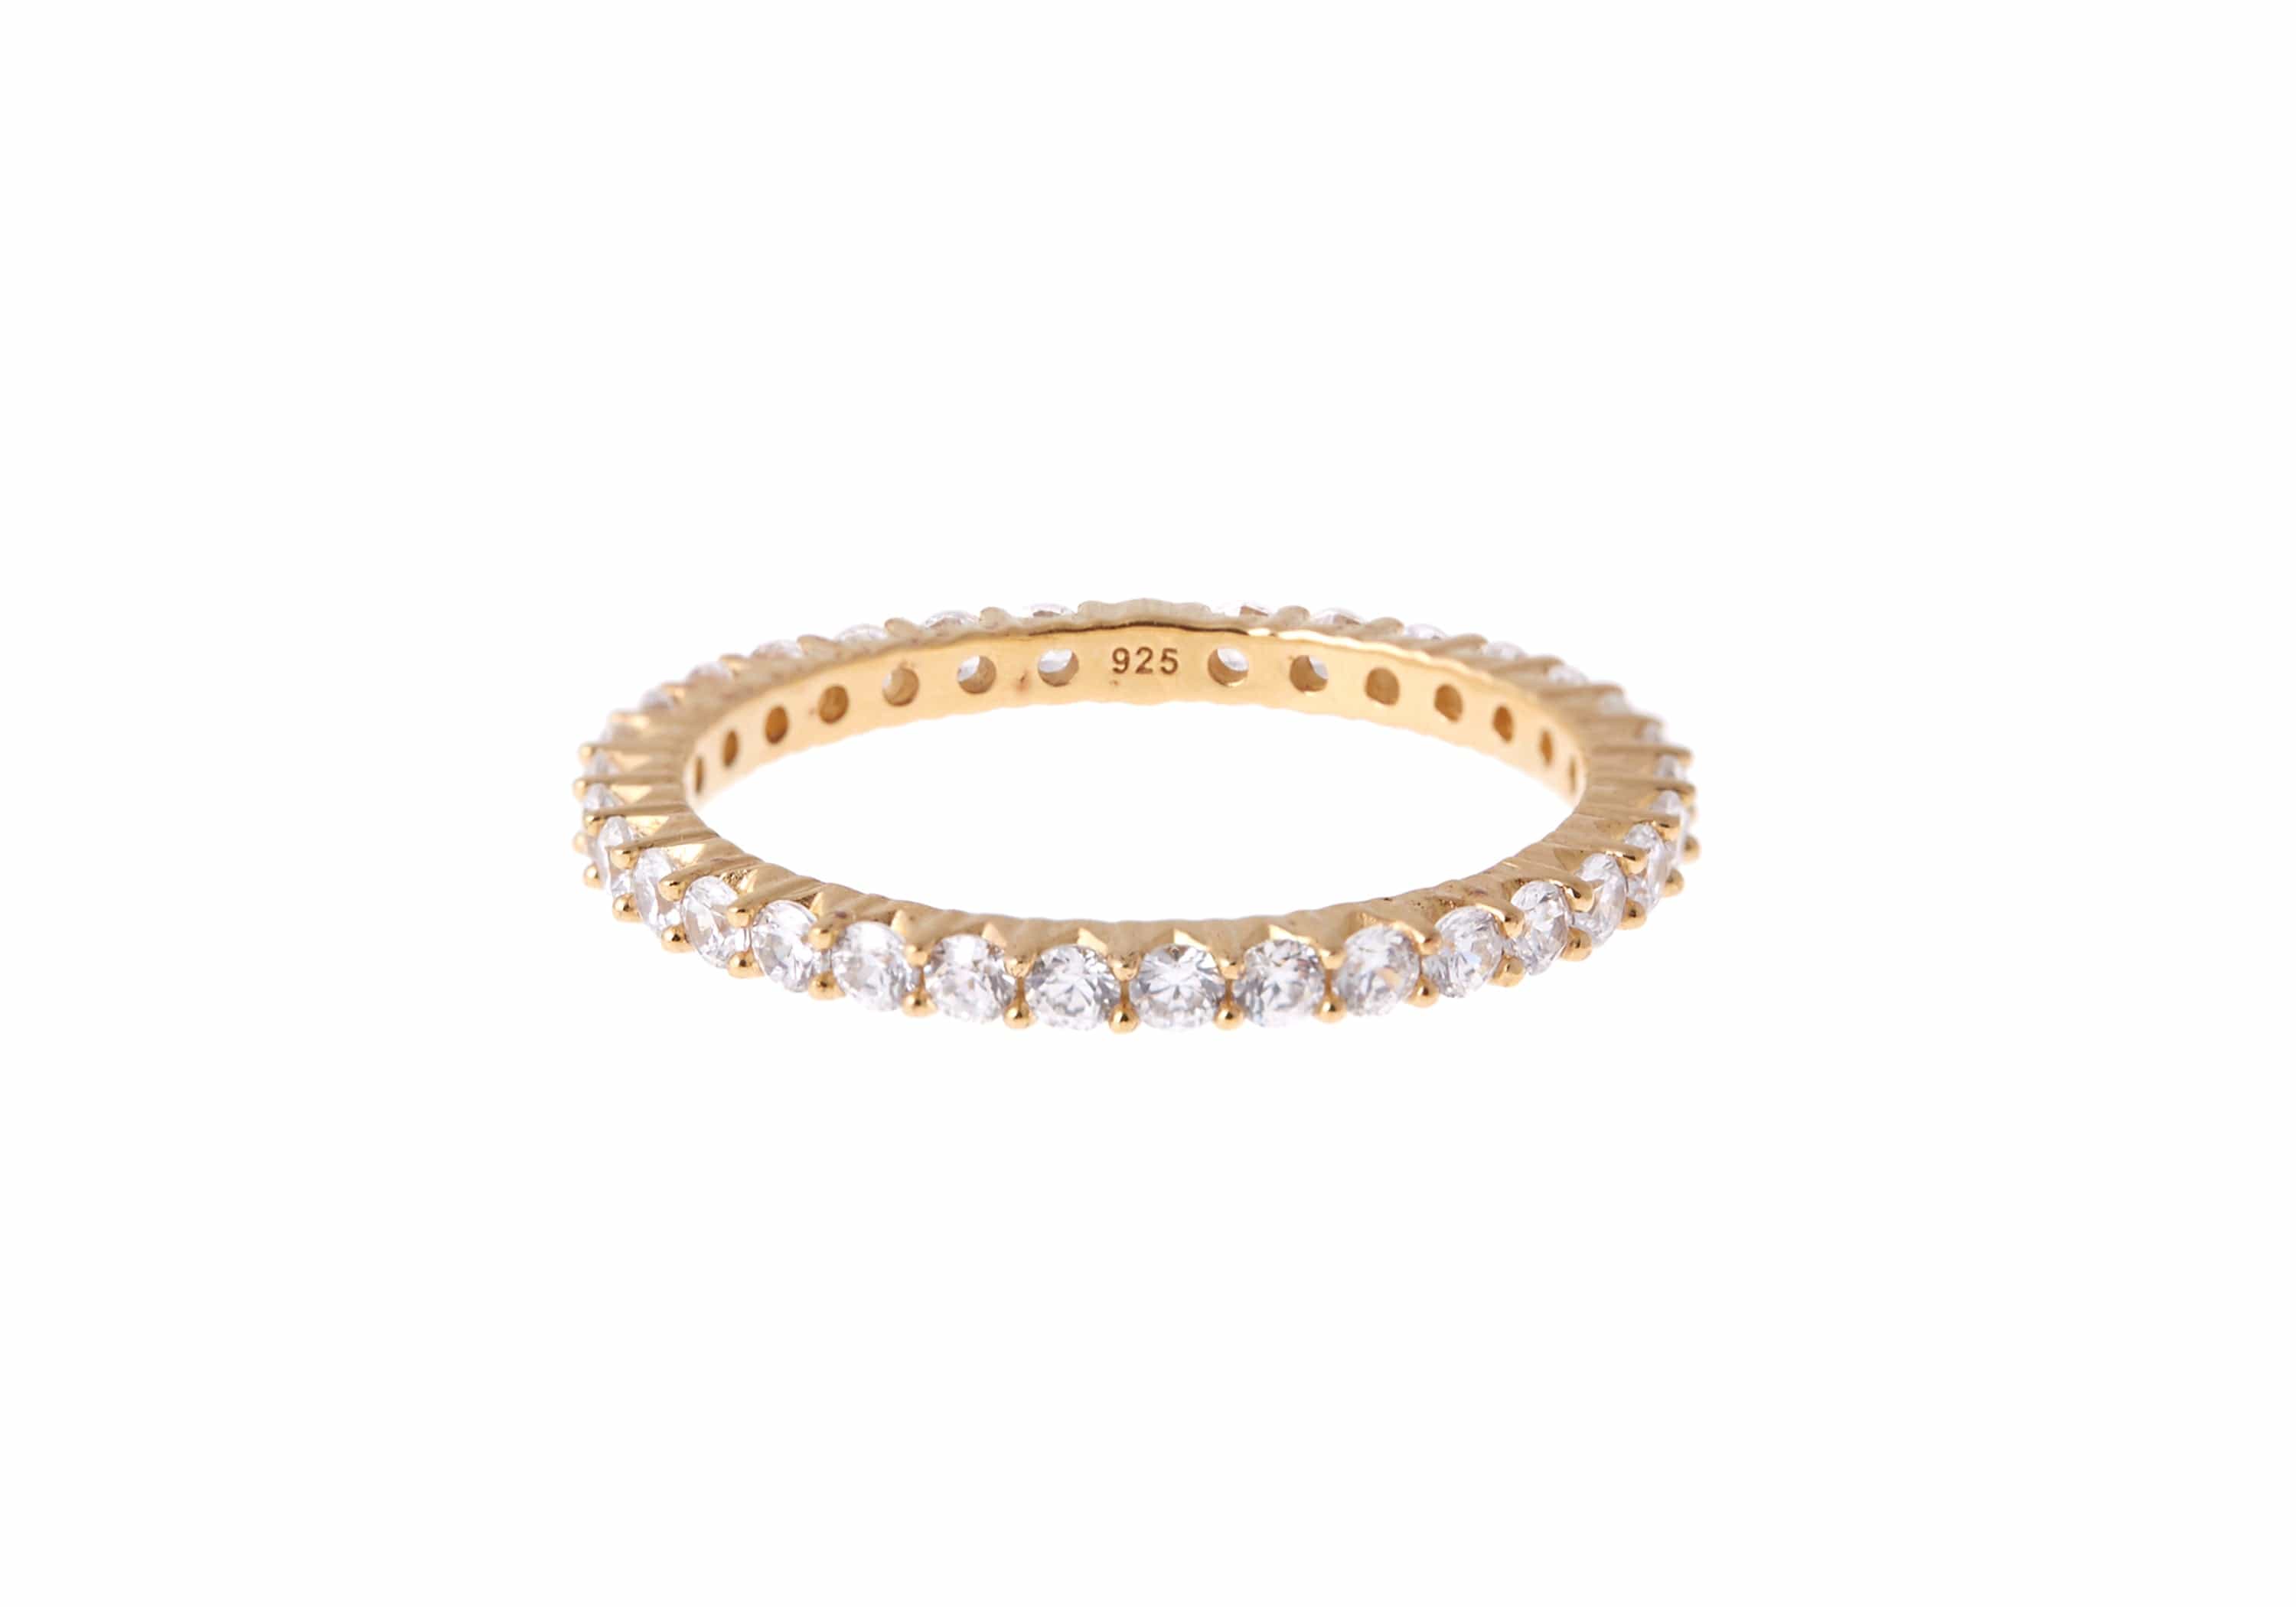 Micropave Eternity Ring